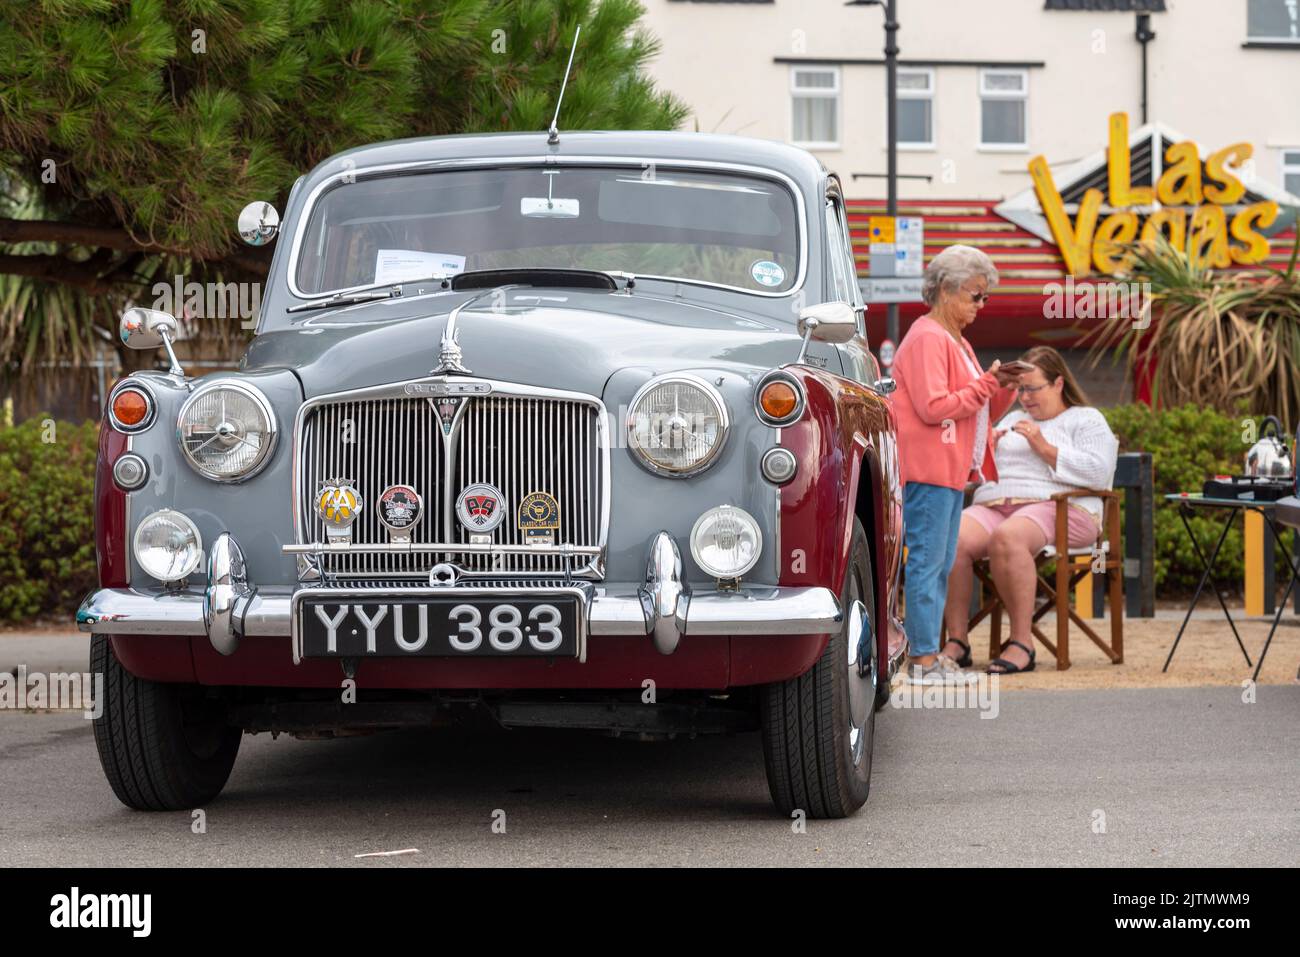 1960 Rover 100 saloon car on show on Marine Parade, Southend on Sea, Essex, UK. Women, possibly partners of owners, passing the time nearby. Camp seat Stock Photo